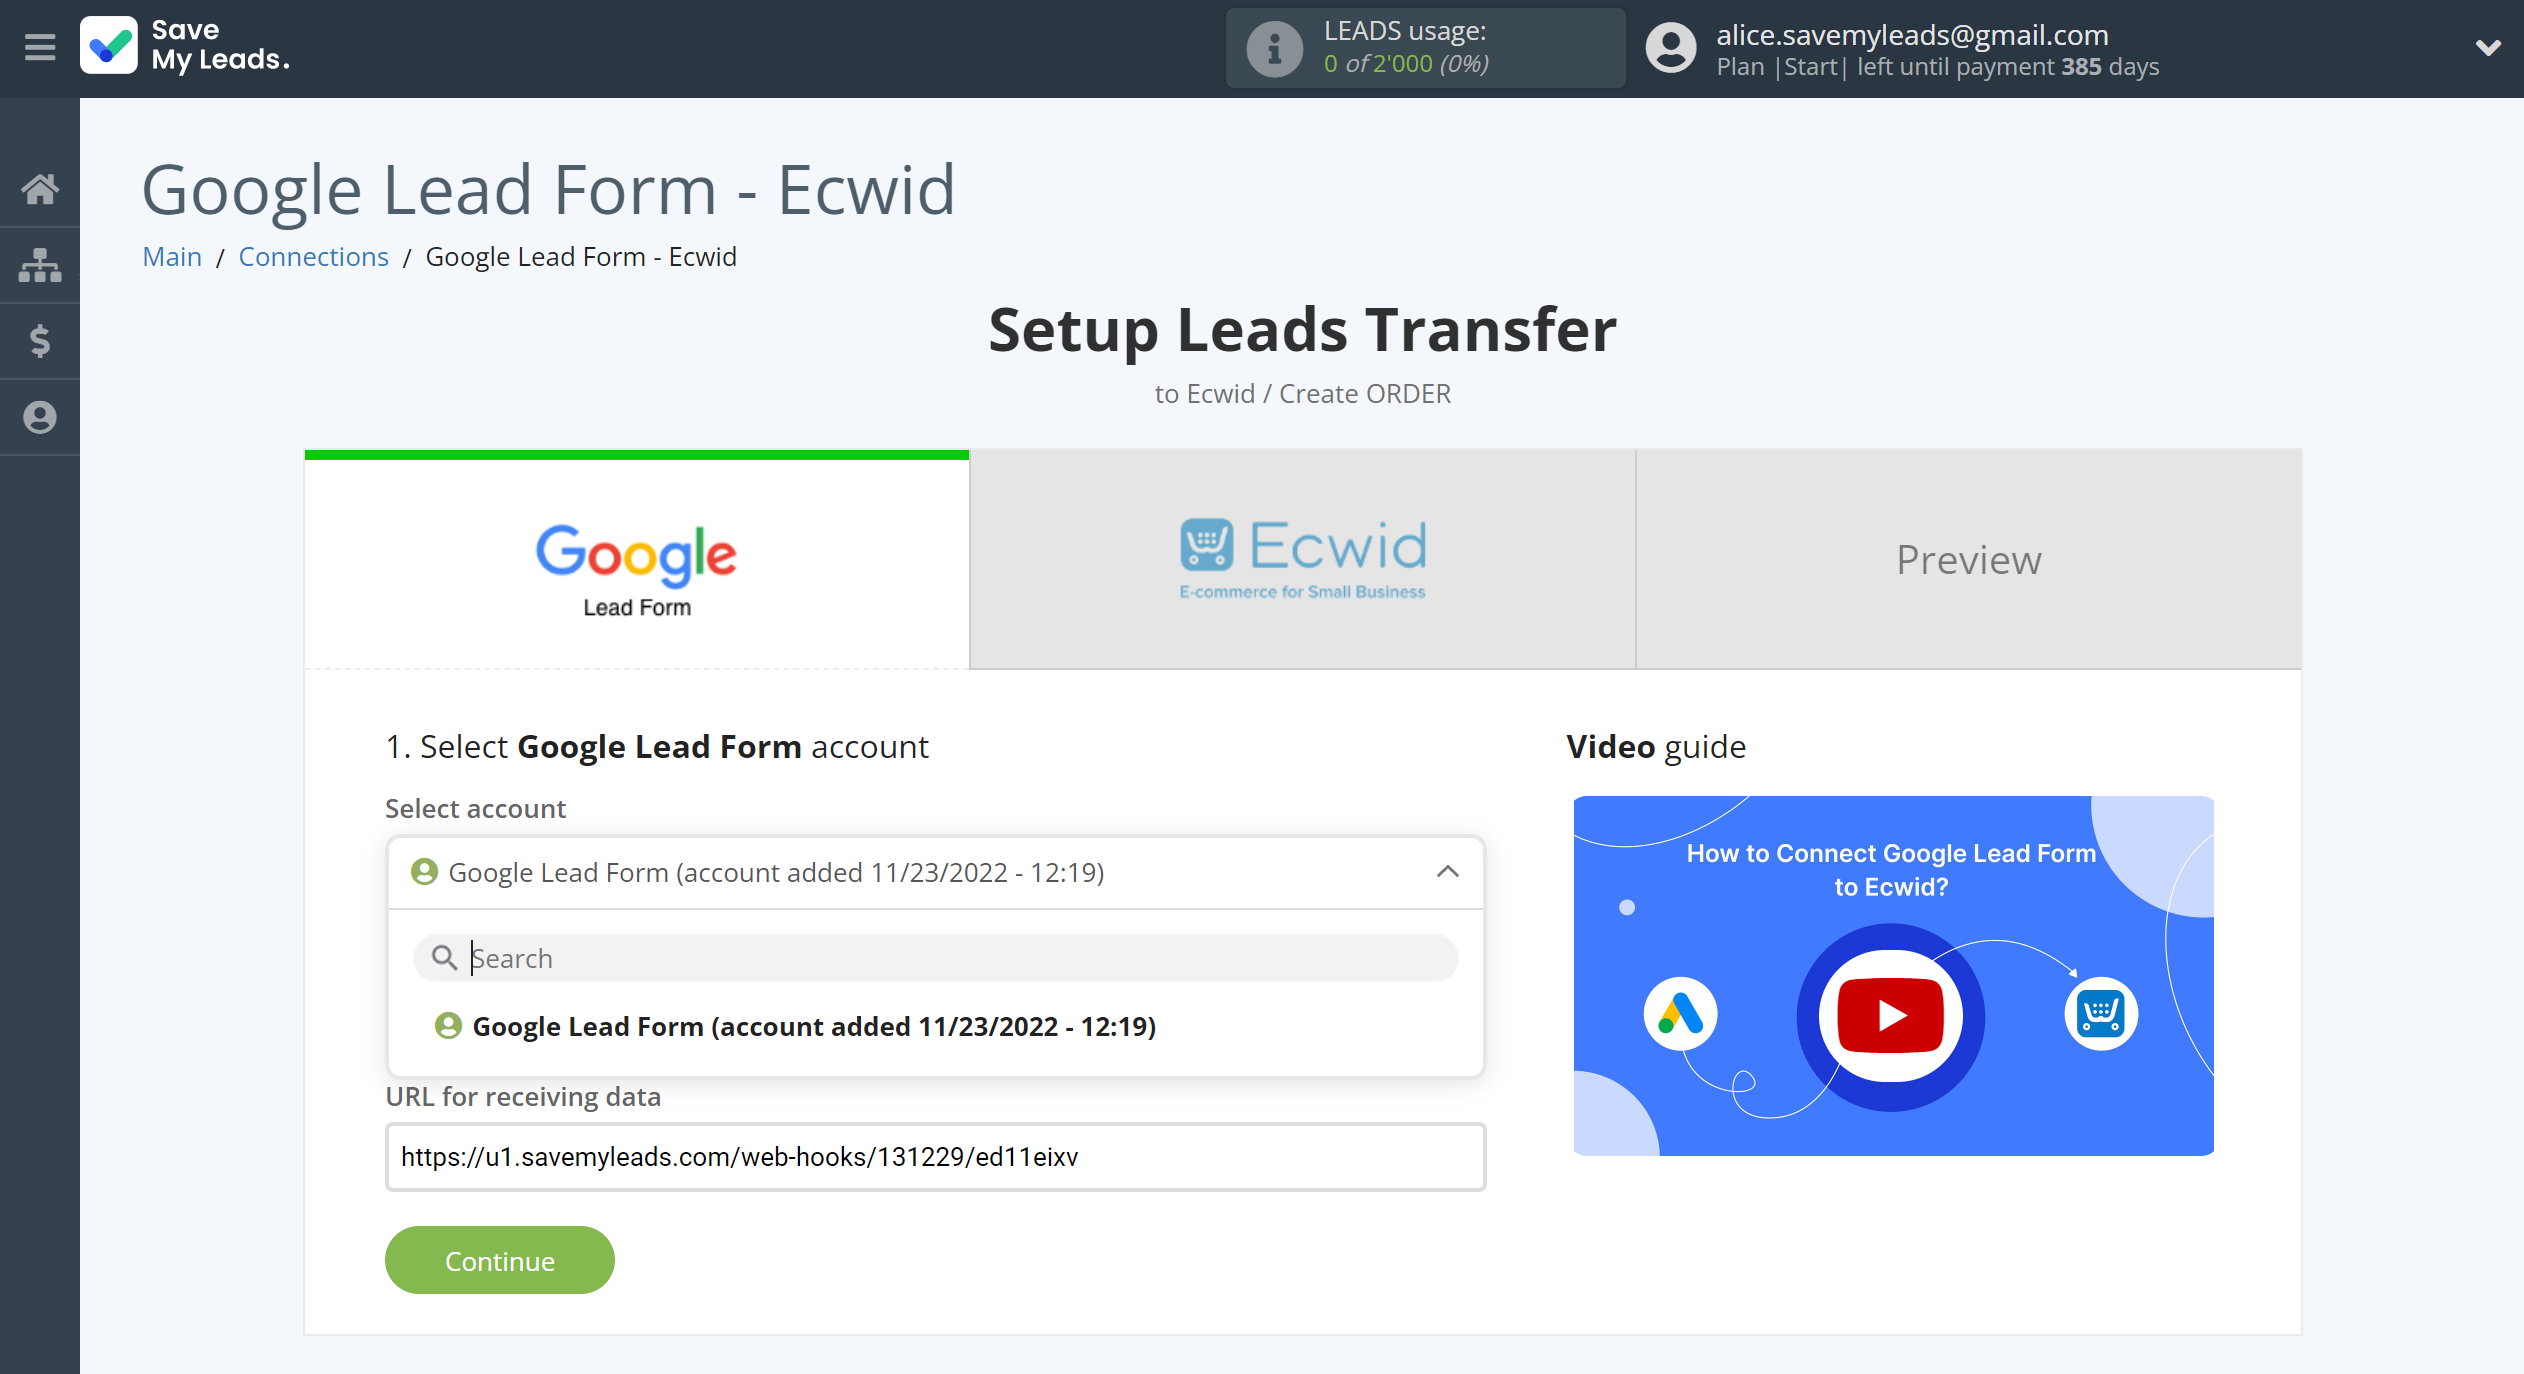 How to Connect Google Lead Form with Ecwid Create Order | Data Source account selection